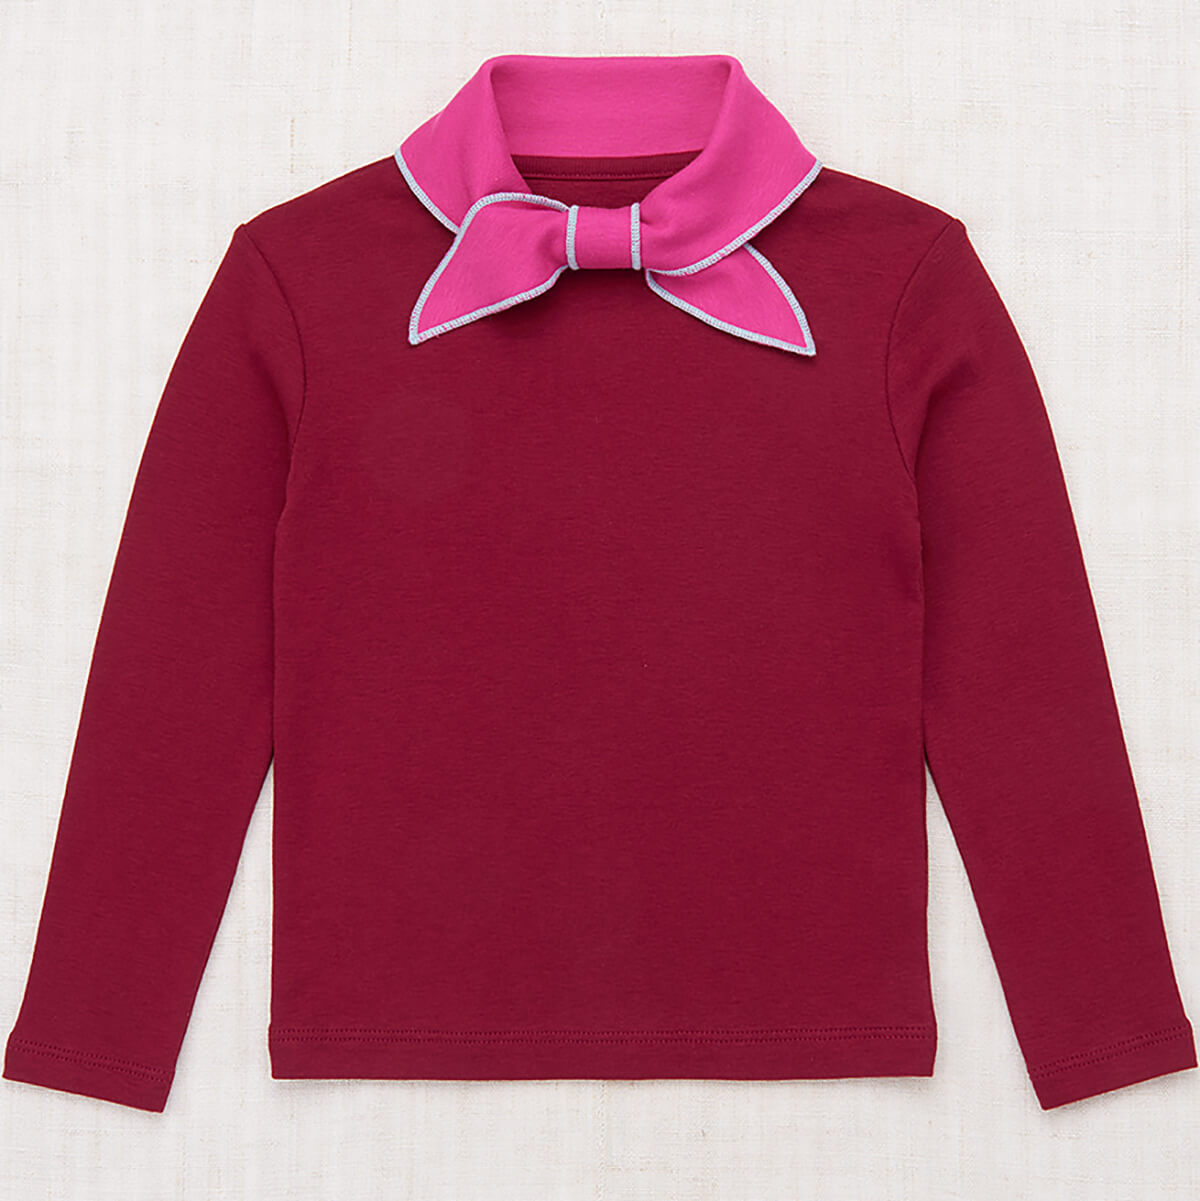 Scout Top in Cranberry by Misha & Puff – Junior Edition